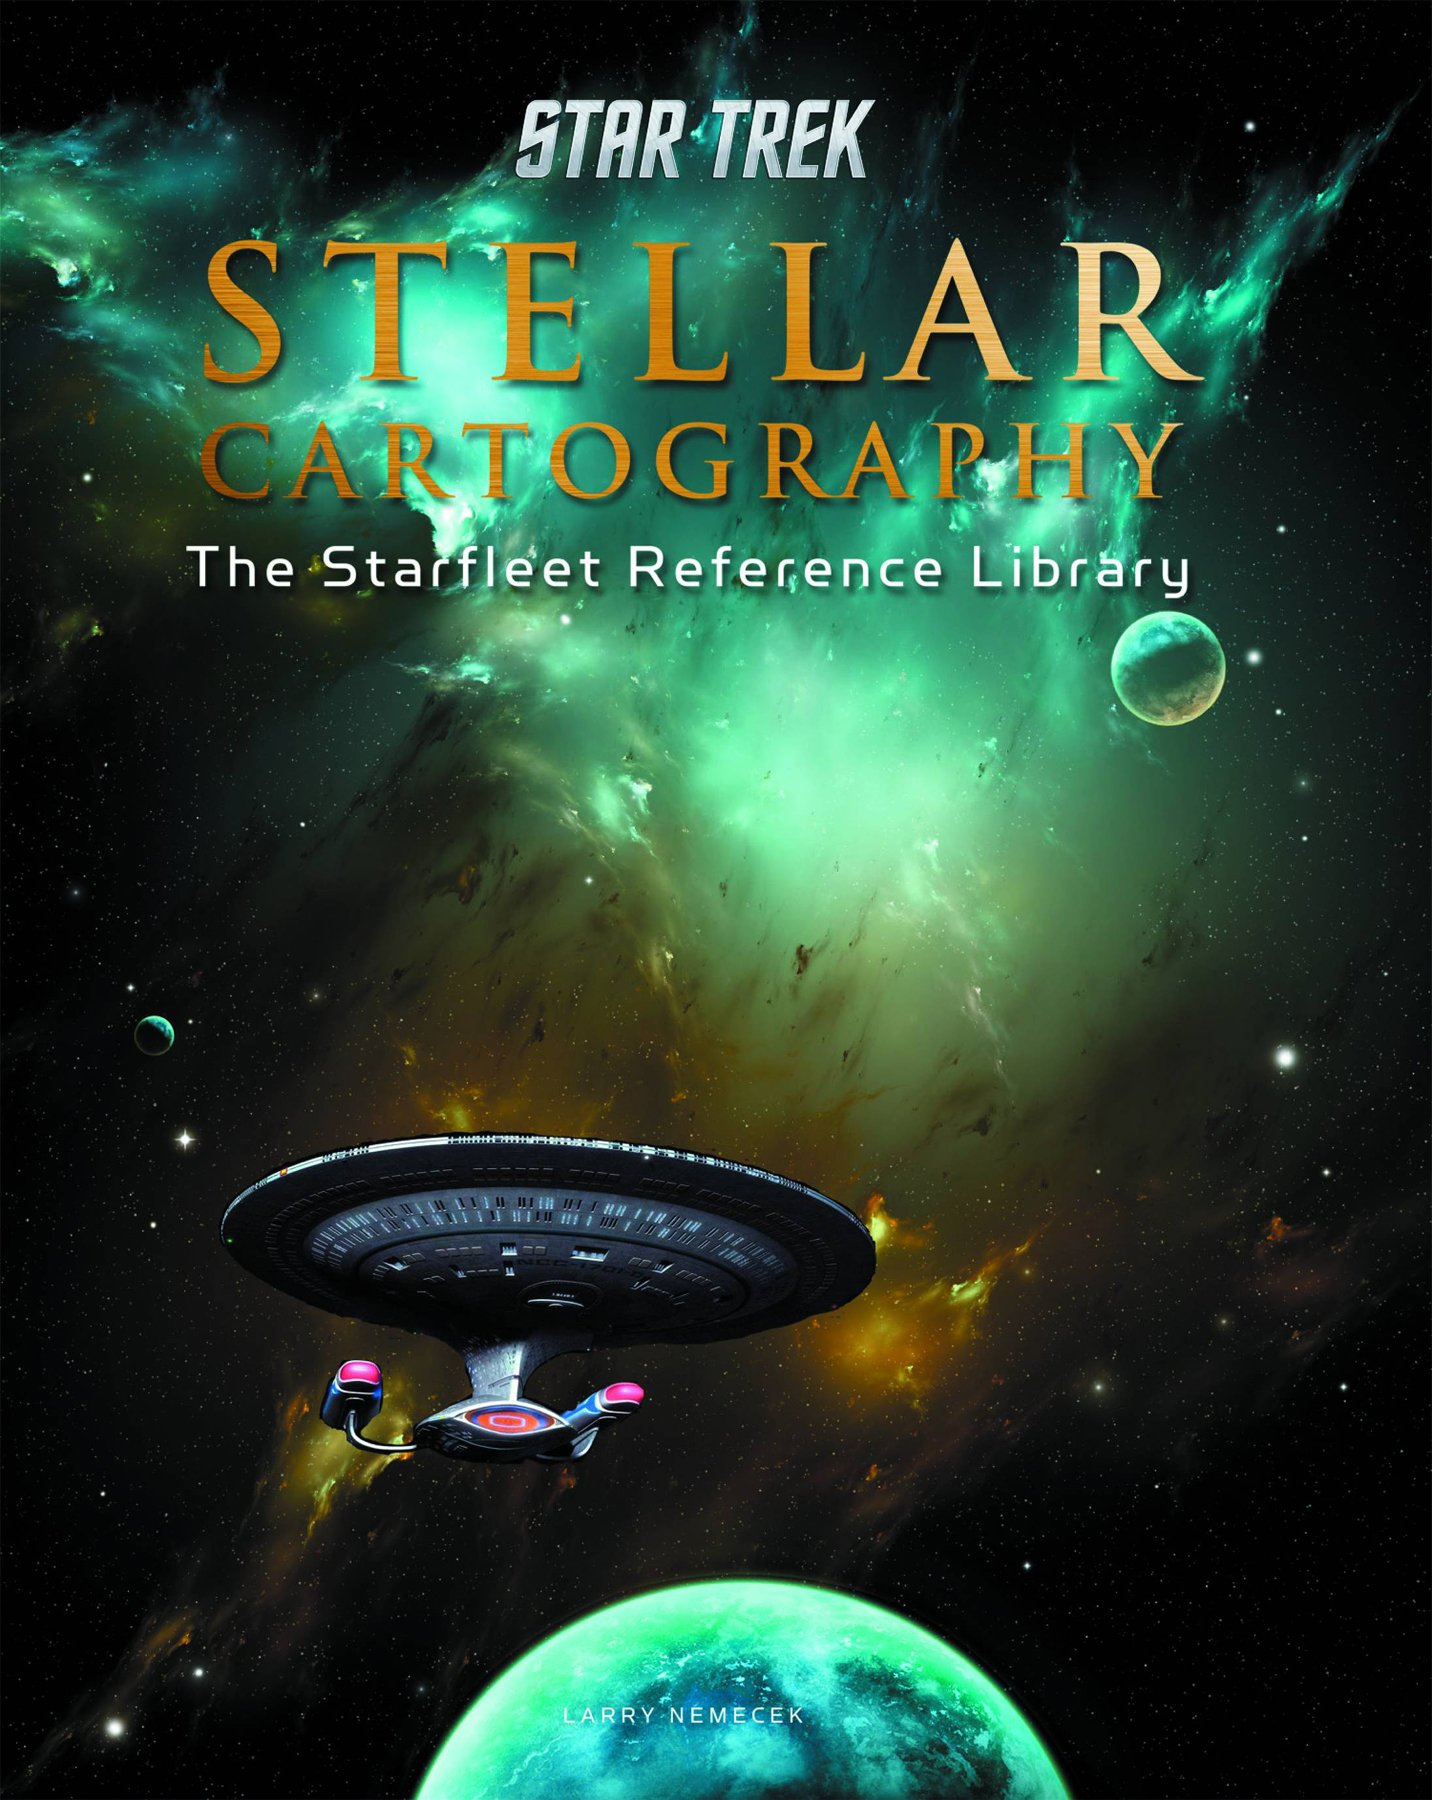 “Star Trek Stellar Cartography: The Starfleet Reference Library” Review by The Trek Collective